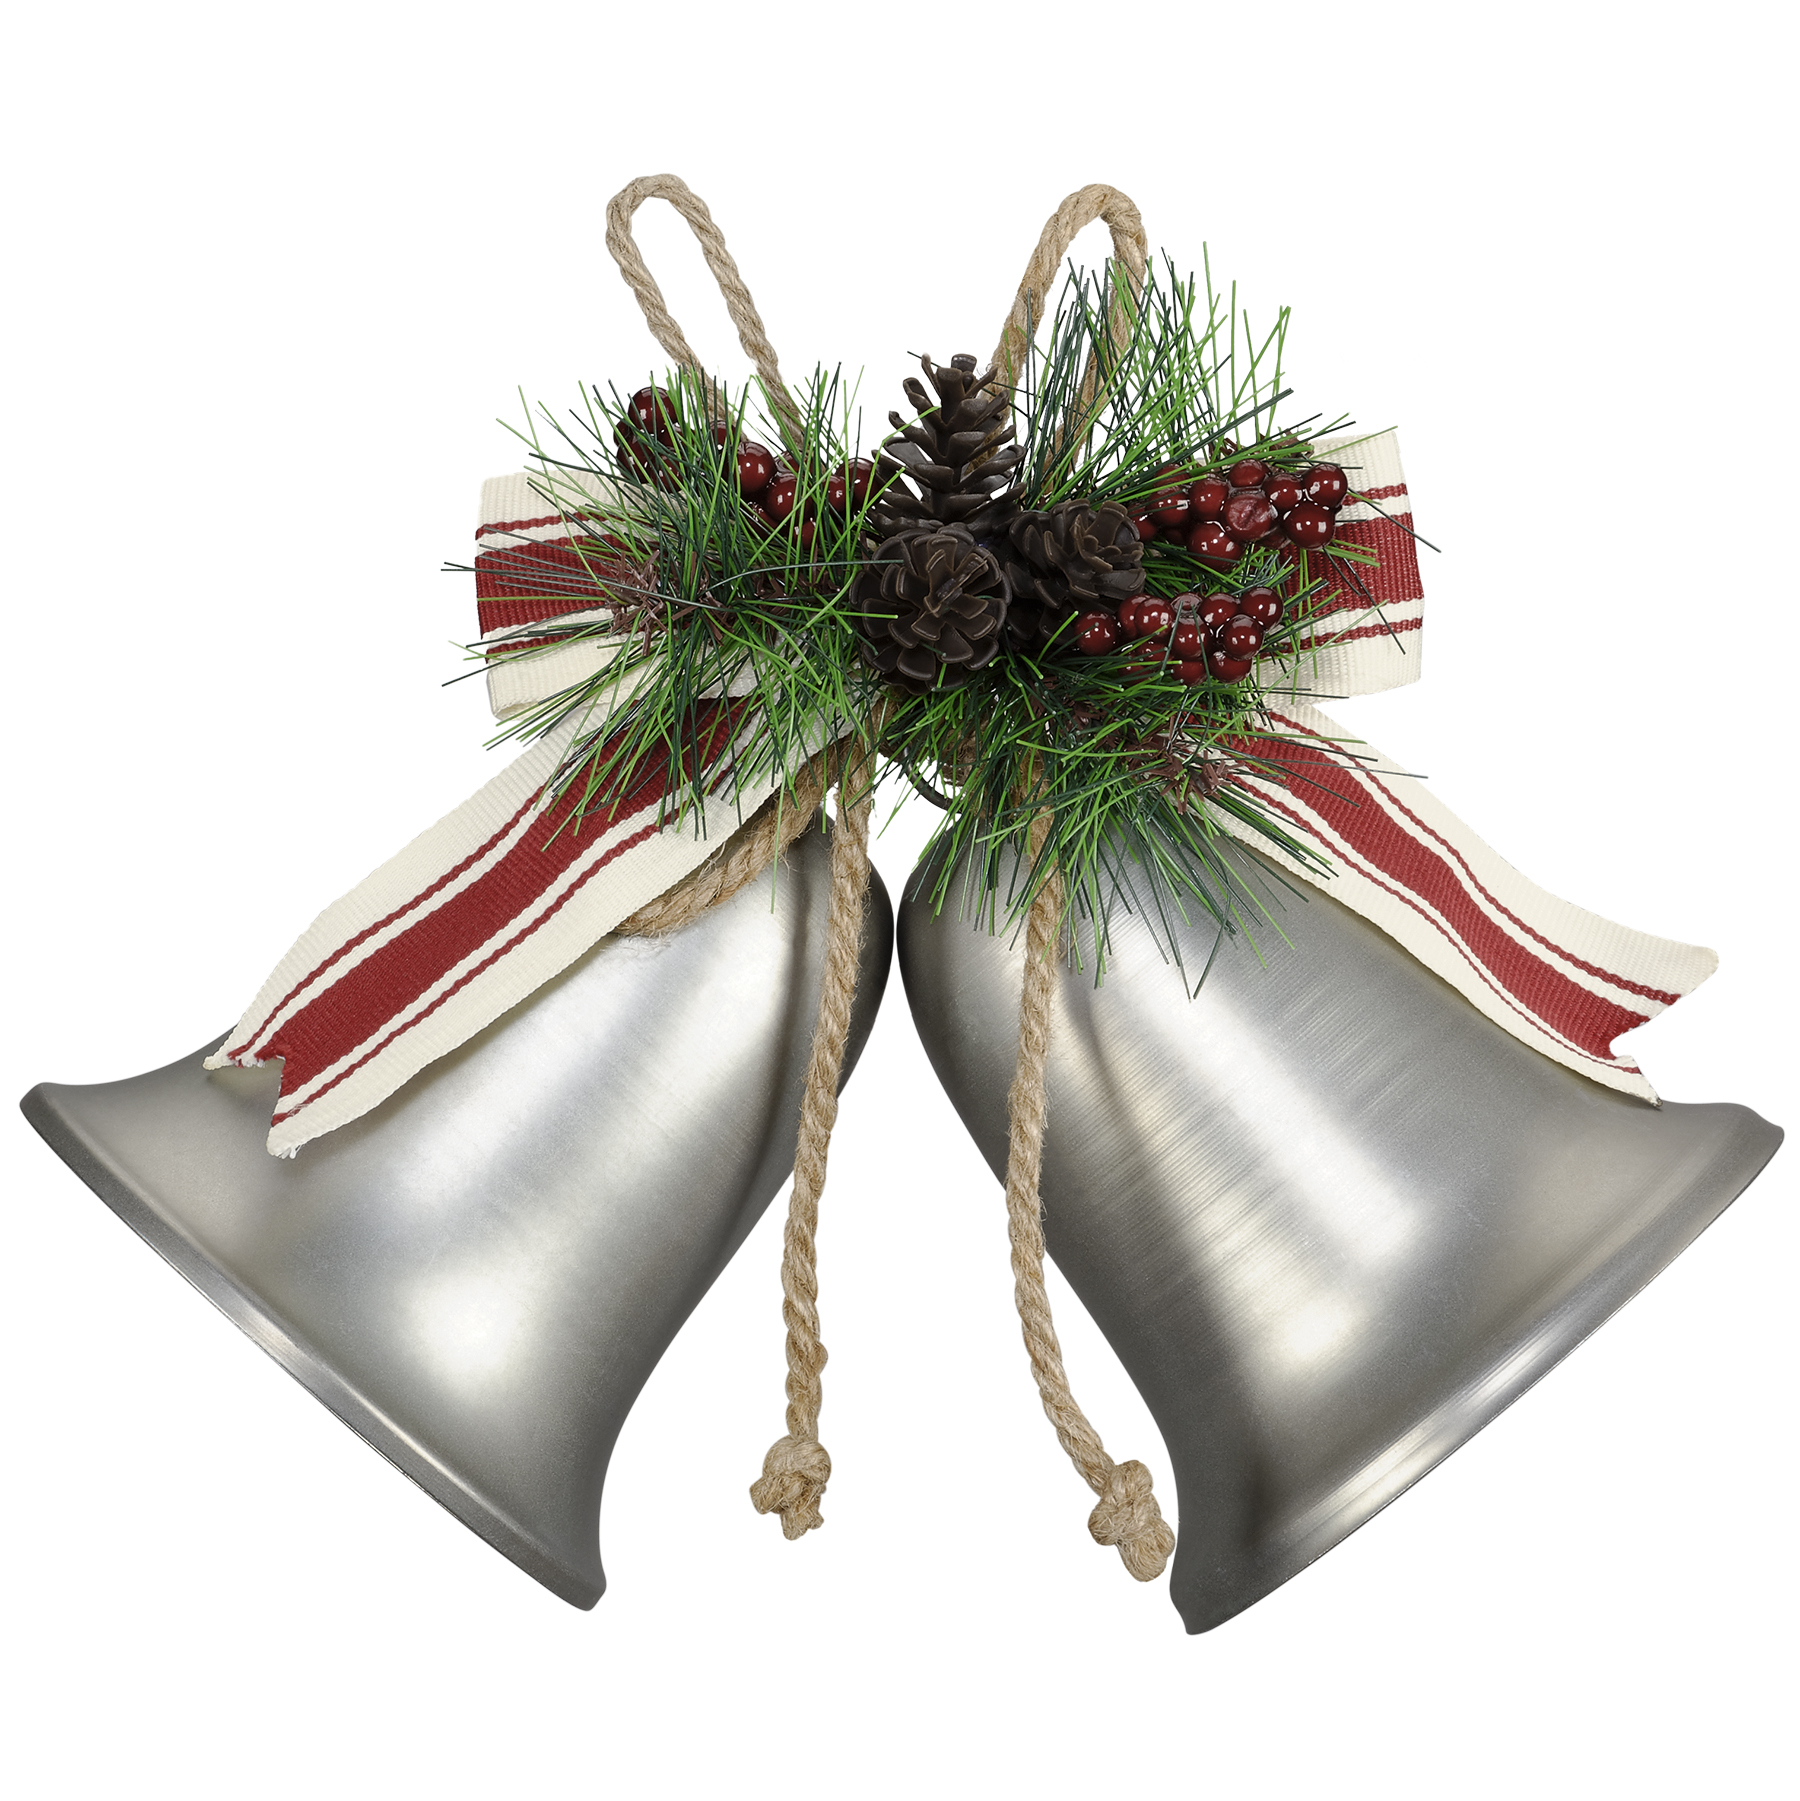 Find the Christmas Bells Wall Decor By Ashland™ at Michaels